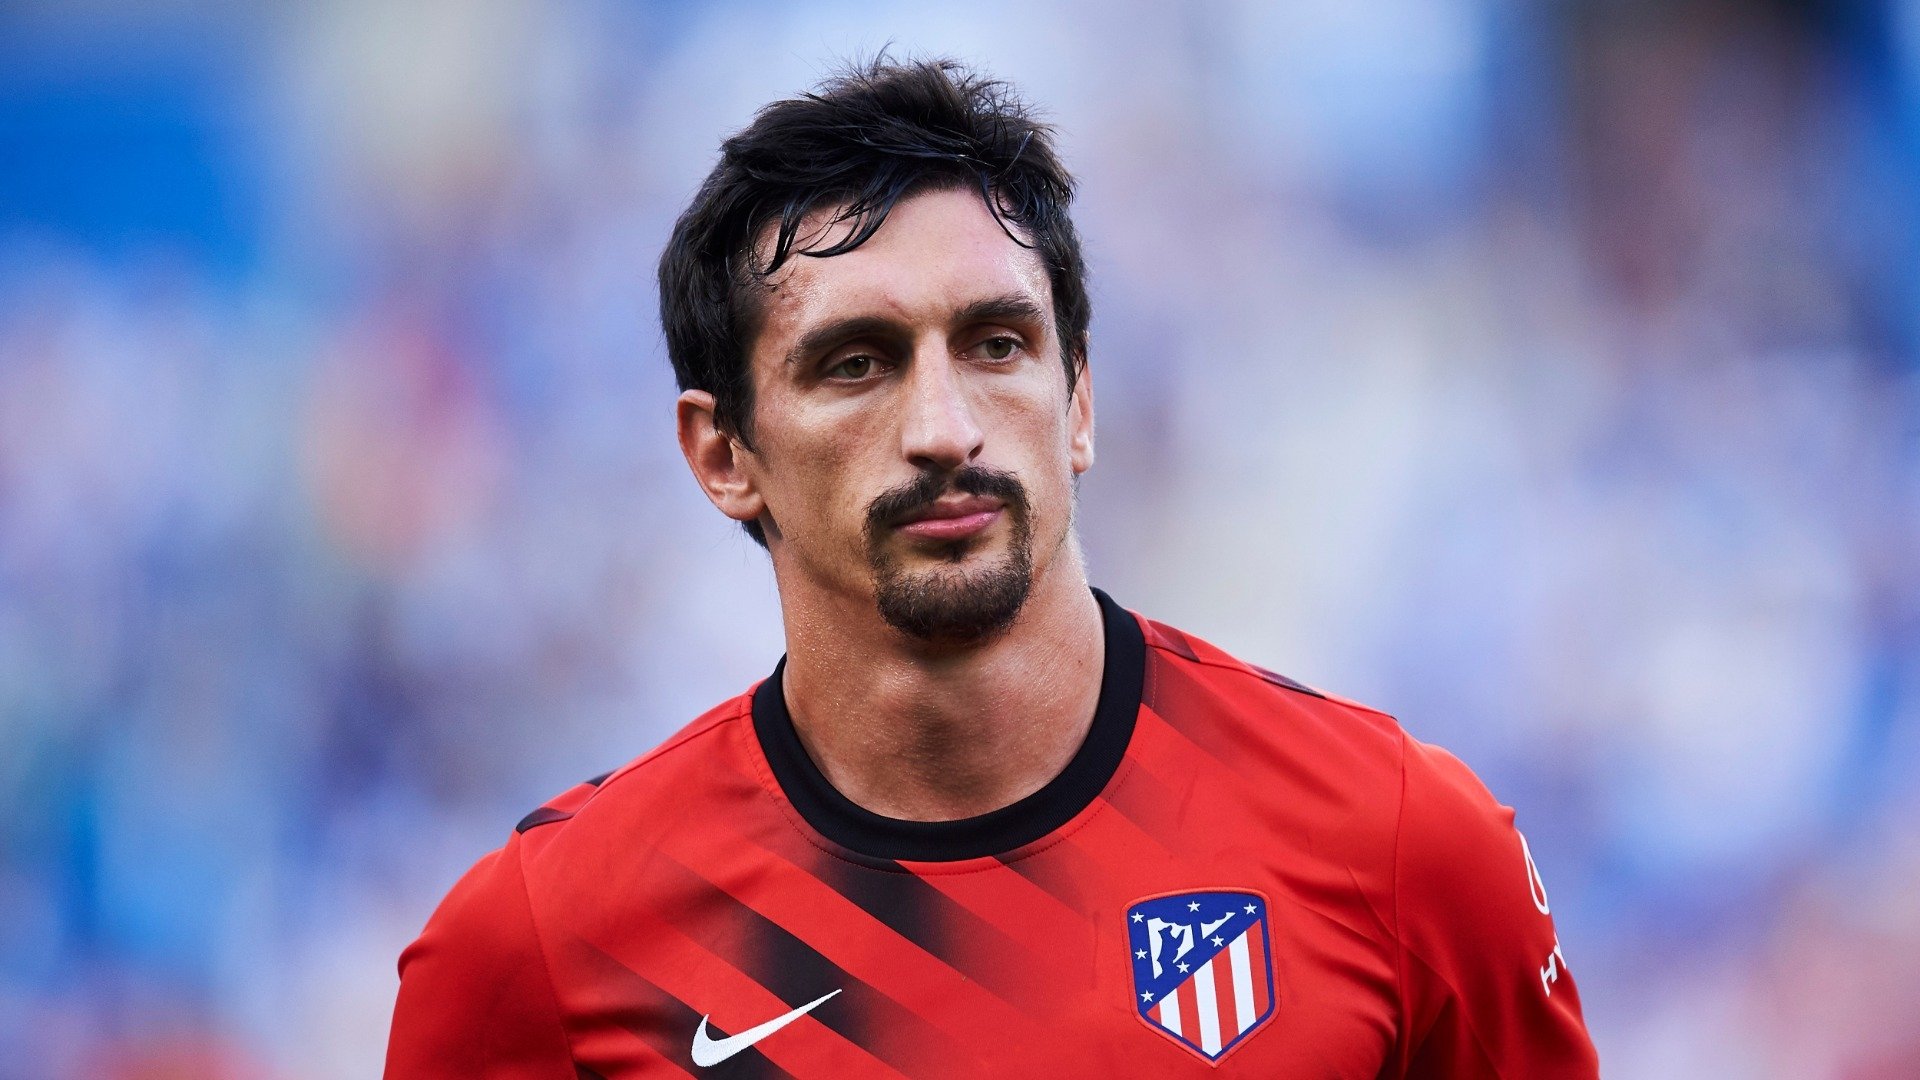 LazioLand Fiorentina player Stefan Savic said after #AtleticoLiverpool he still watches #SerieA. And he really hopes #Lazio would win the Scudetto